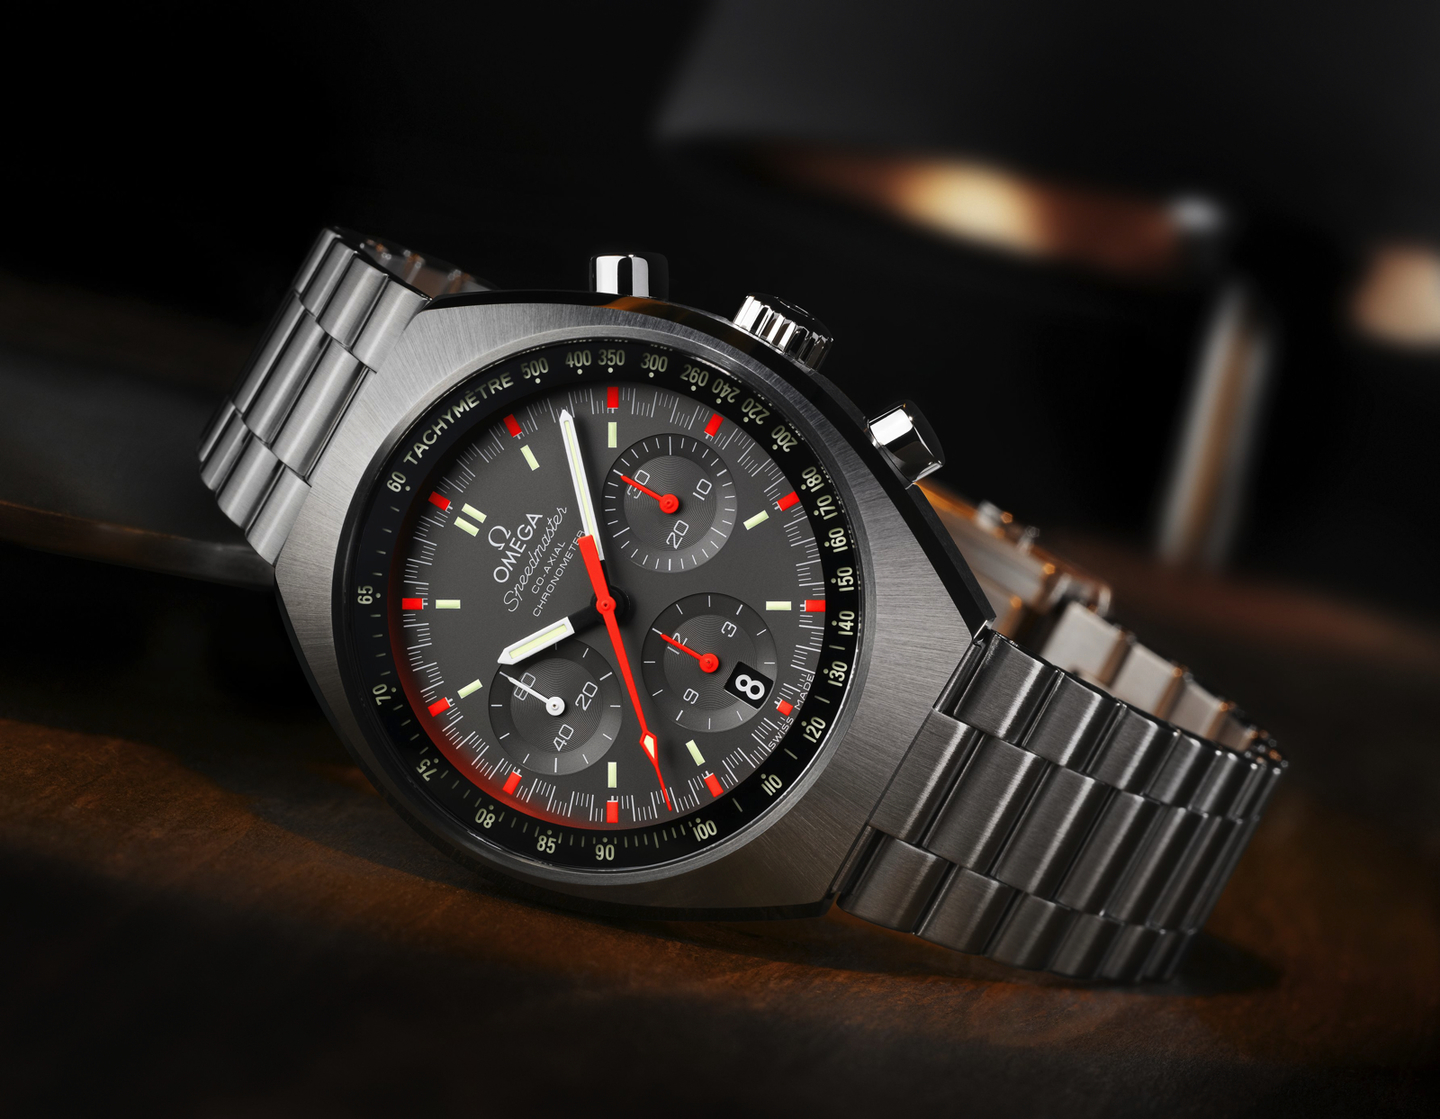 Omega to introduce a new version of the 1969 Speedmaster Mark II at Baselworld 2014